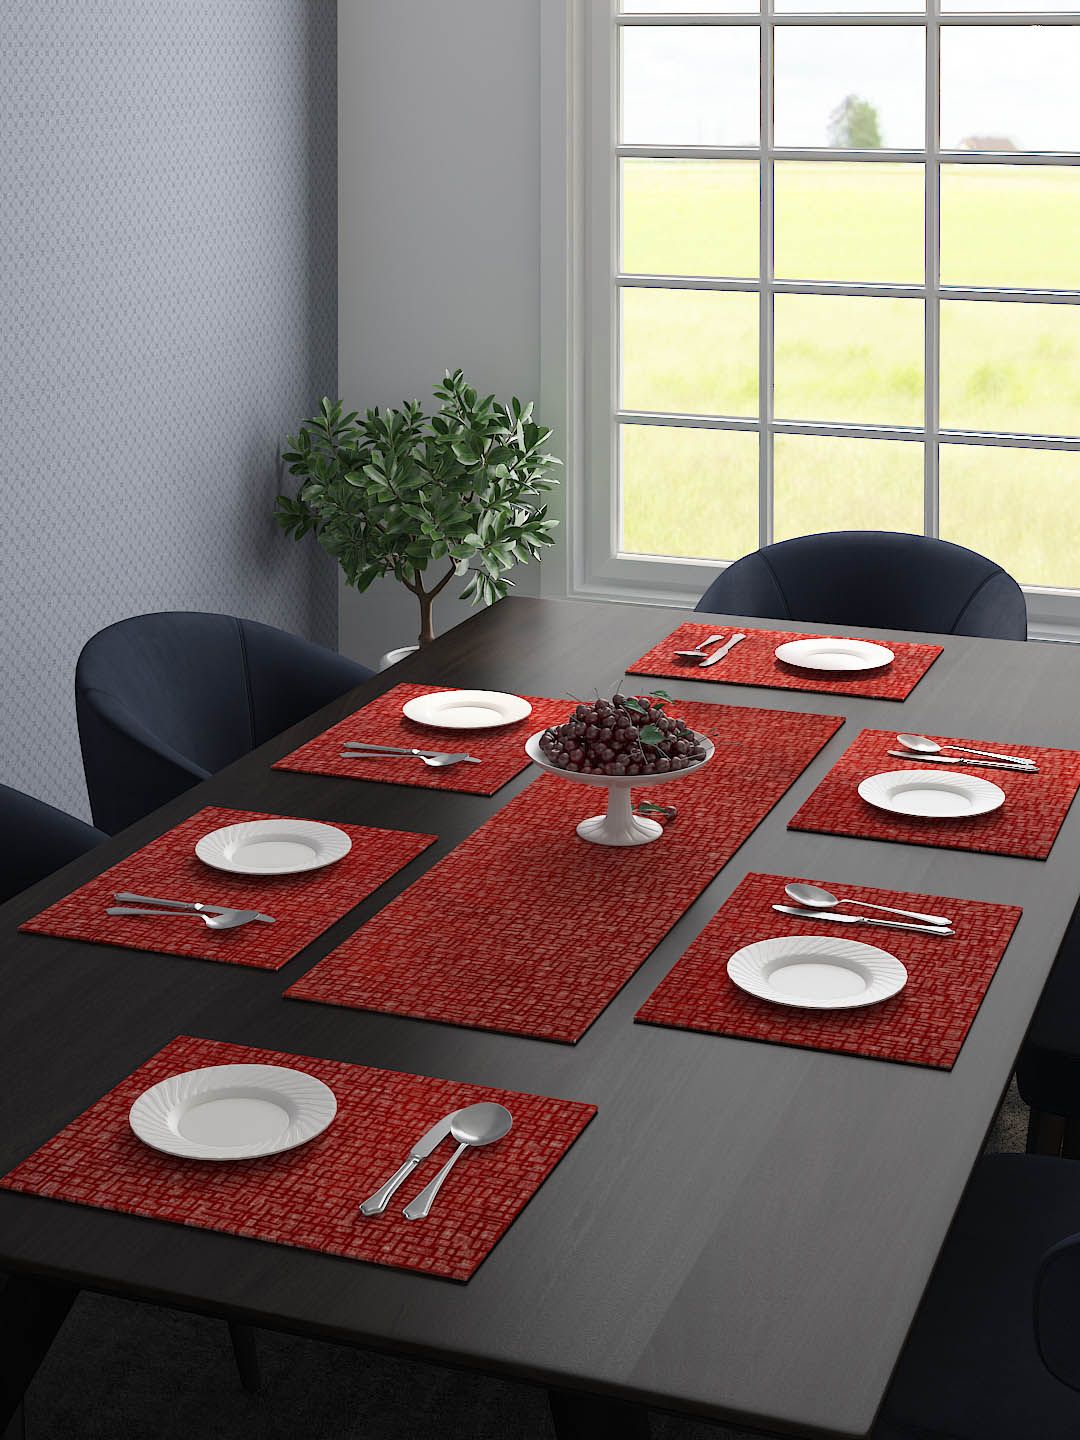 Saral Home Set of 6 Printed Table Placemats & 1 Runner Price in India